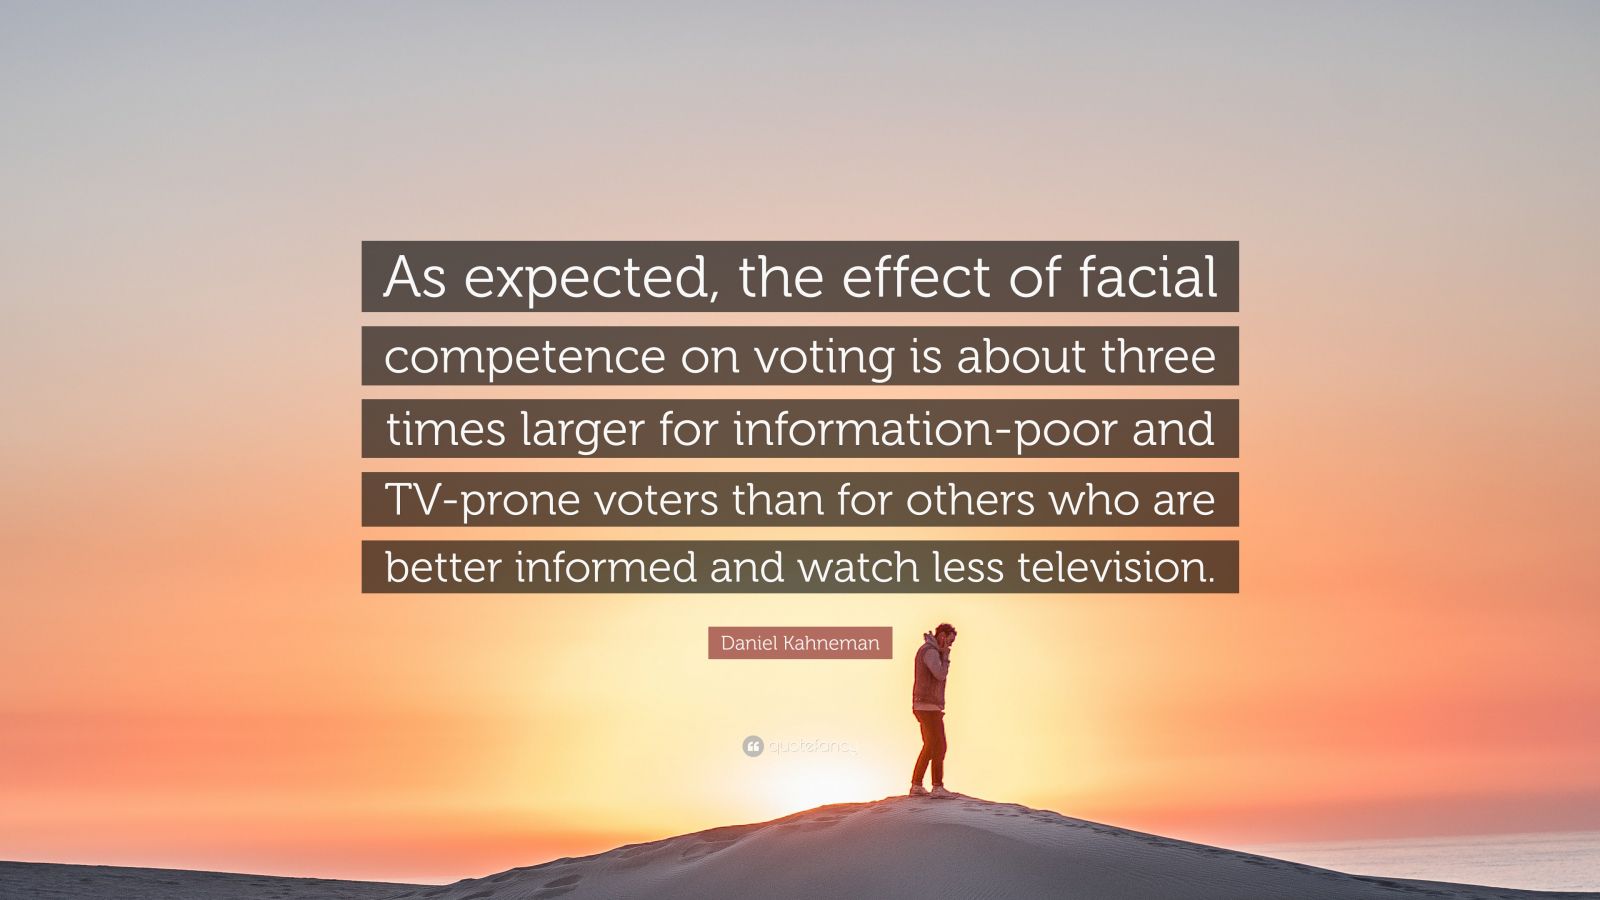 Daniel Kahneman Quote: “As expected, the effect of facial competence on  voting is about three times larger for information-poor and TV-prone vot...”